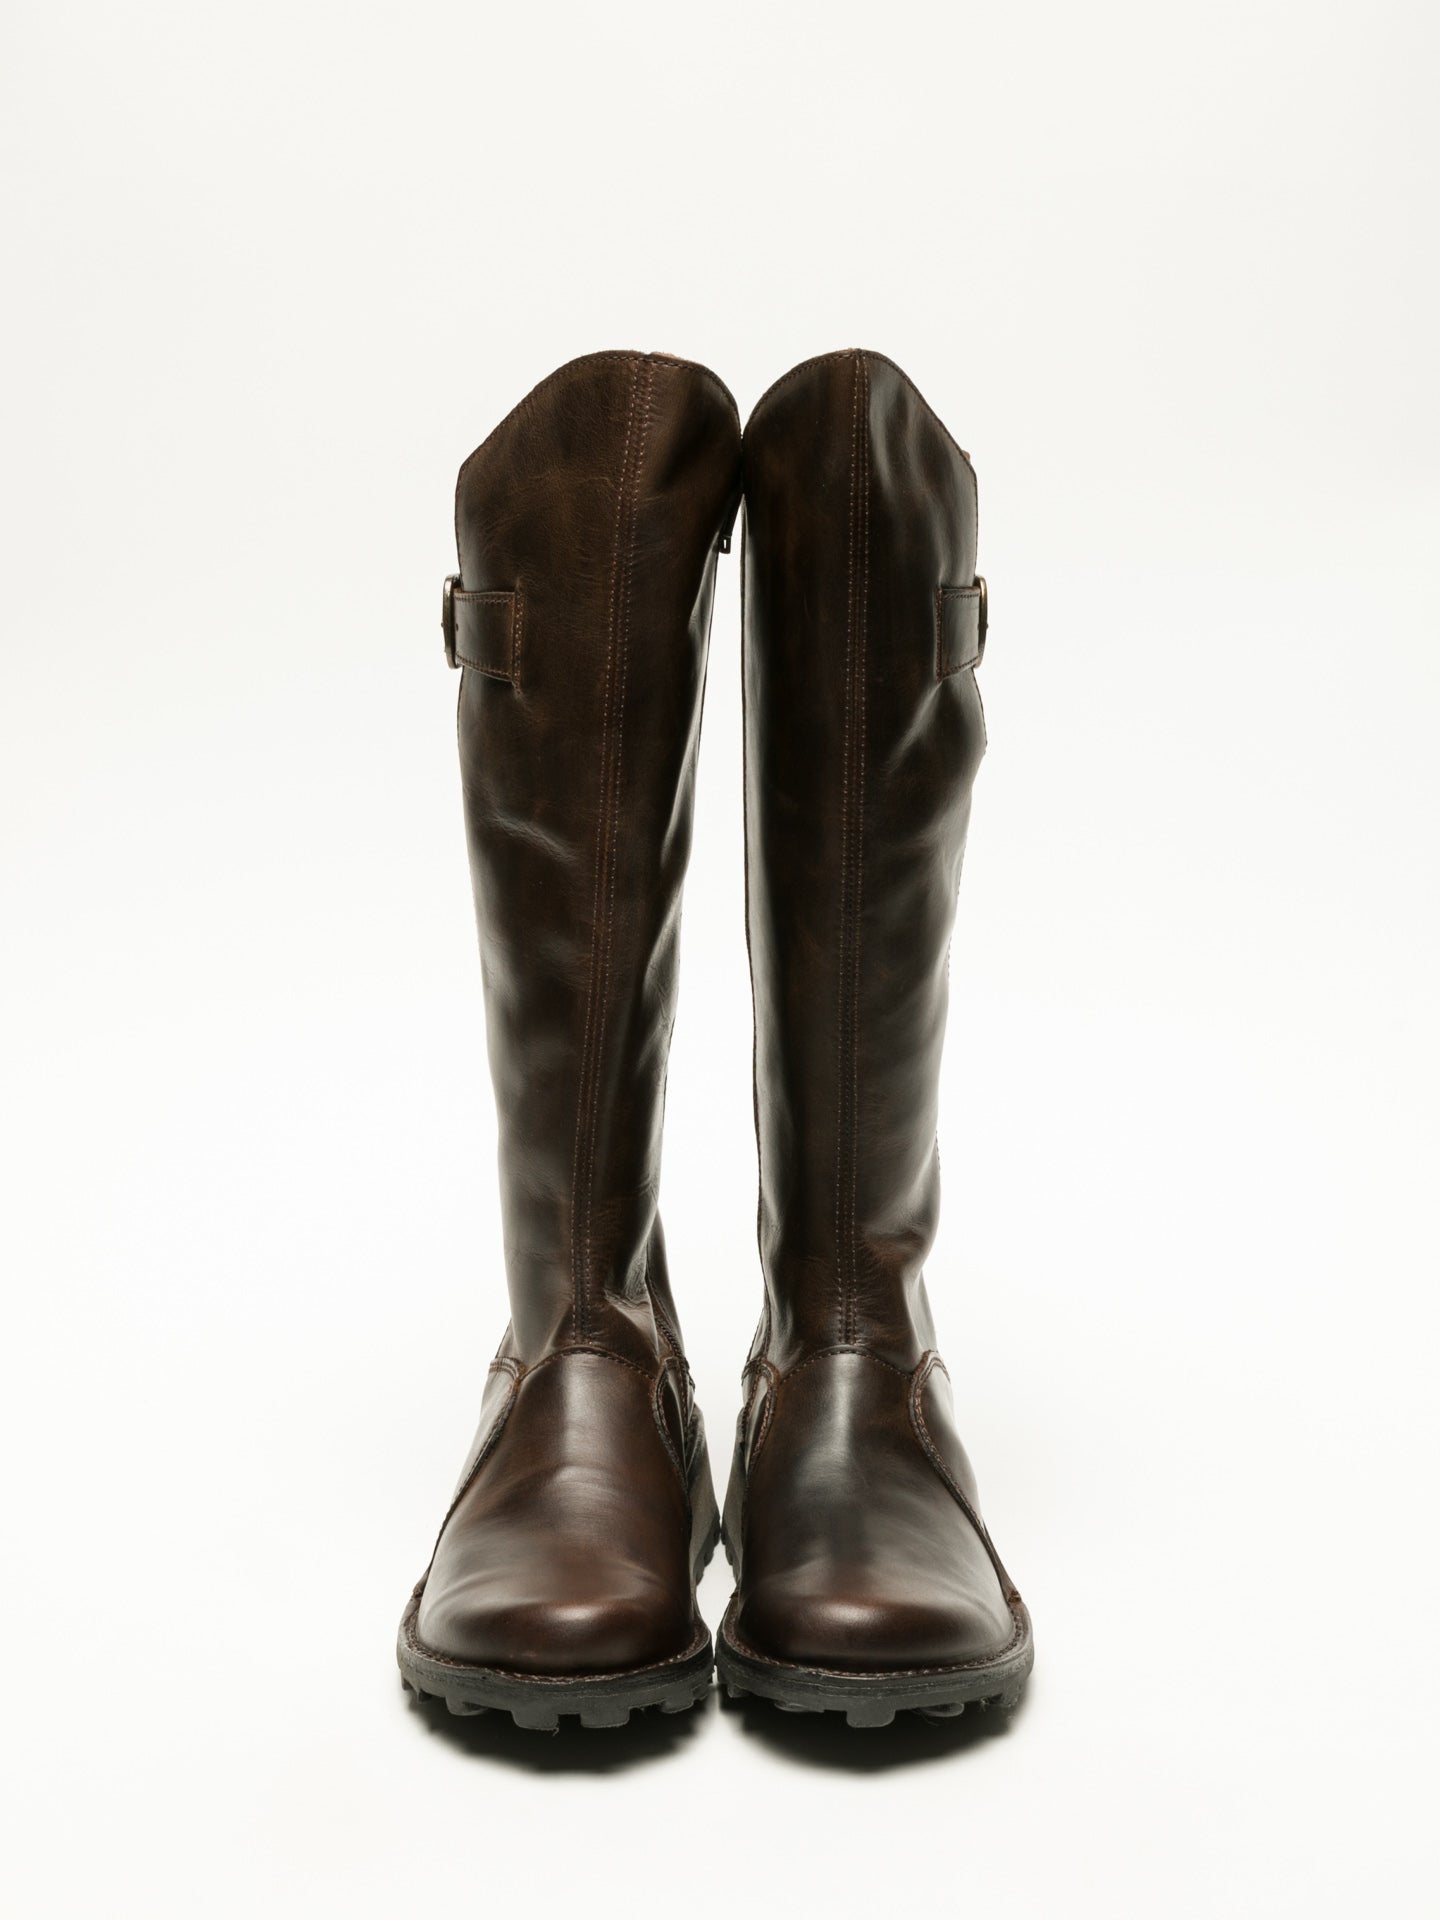 Fly London SaddleBrown Zip Up Boots